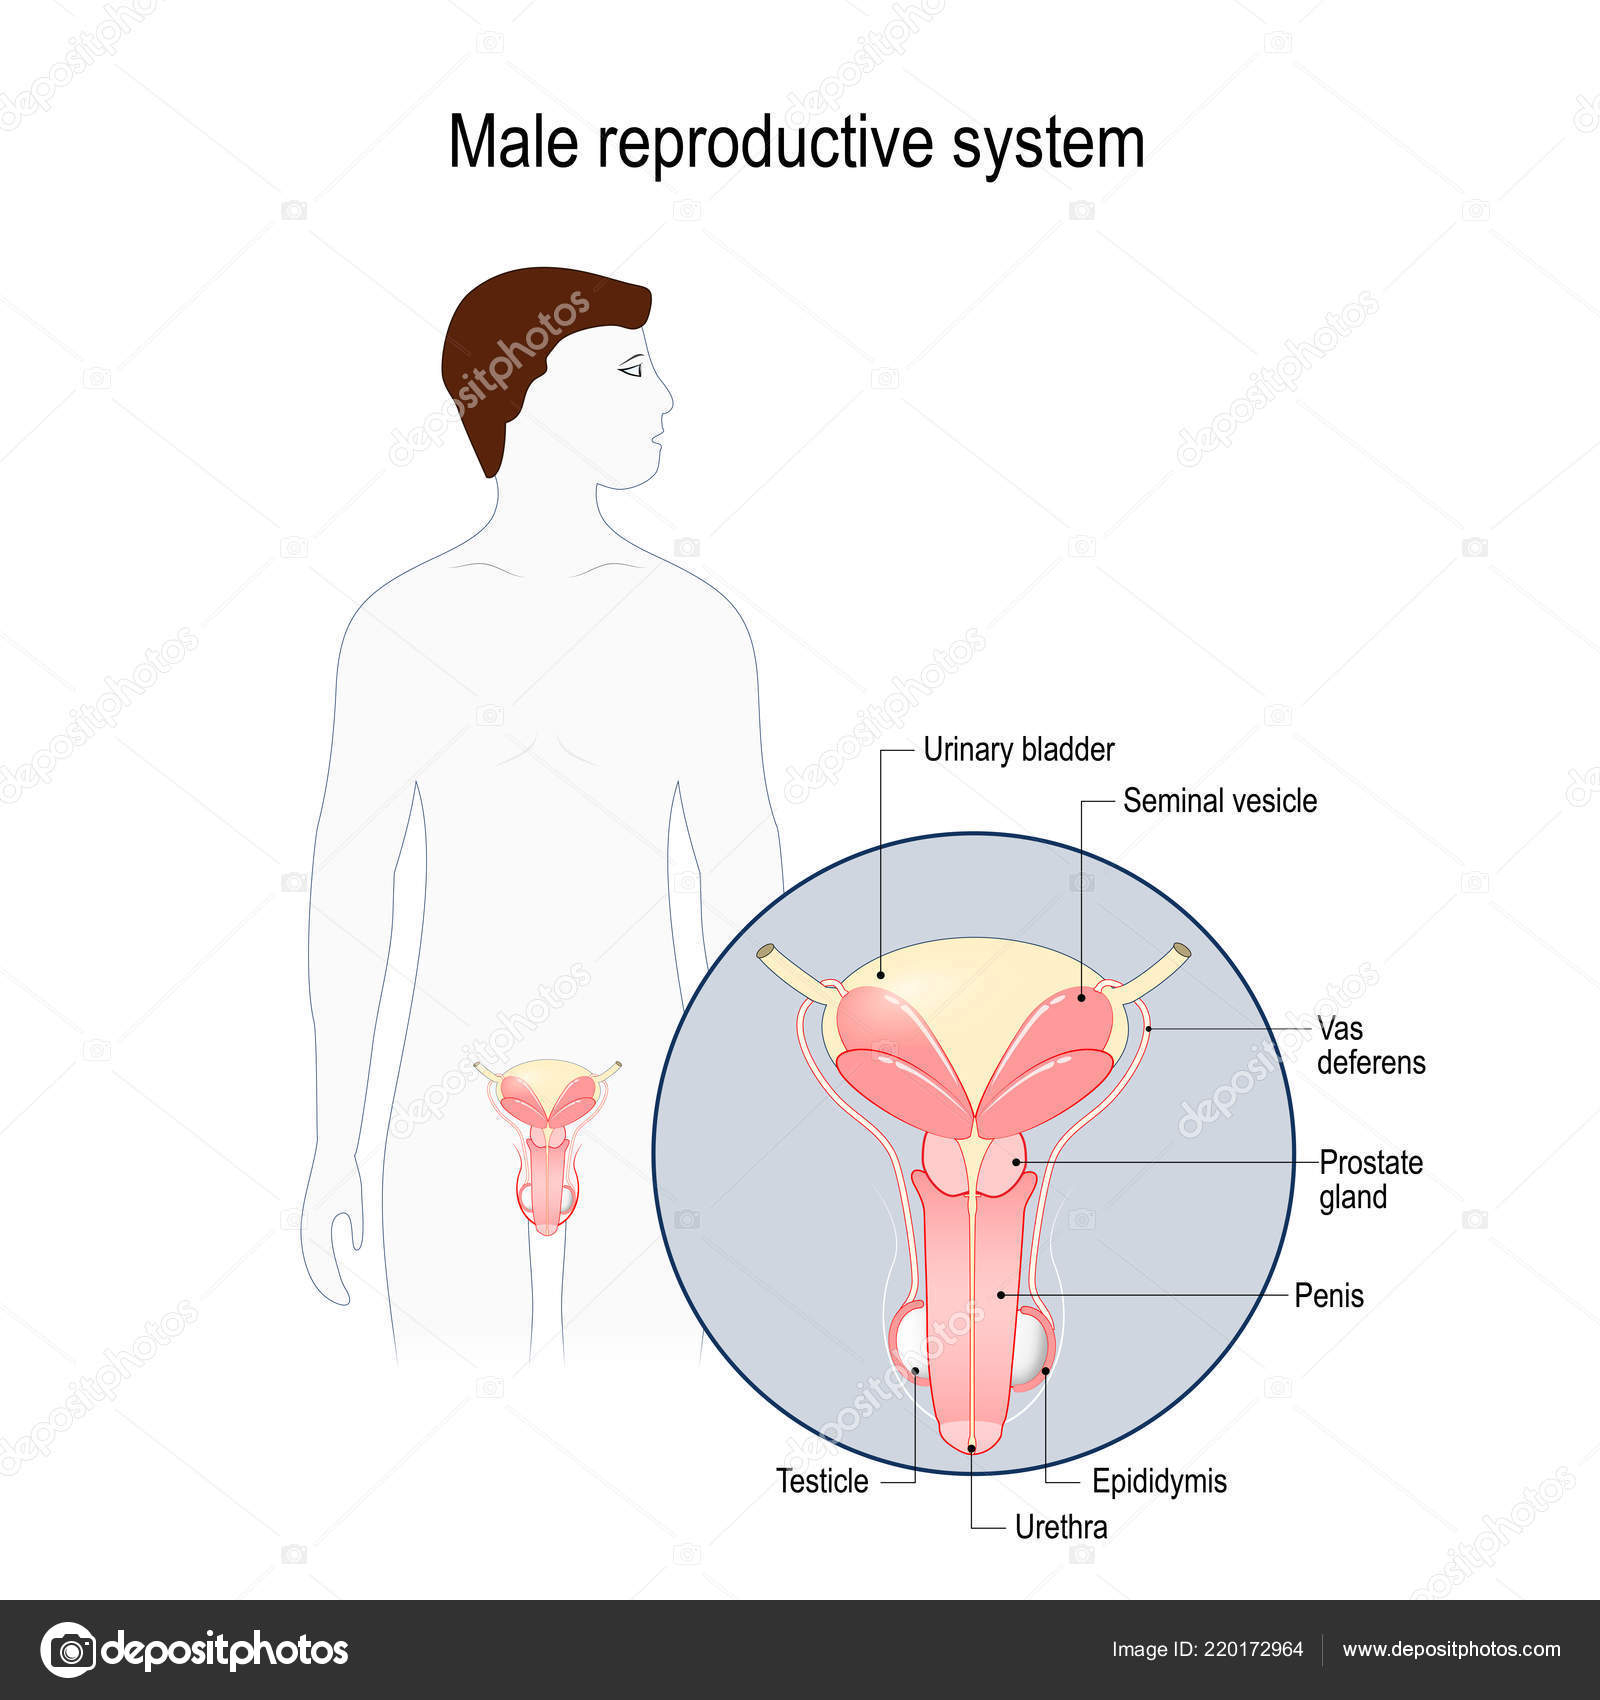 Male Reproductive System Diagram Male Reproductive System Seminal Vesicle Vas Deferens Prostate Gland